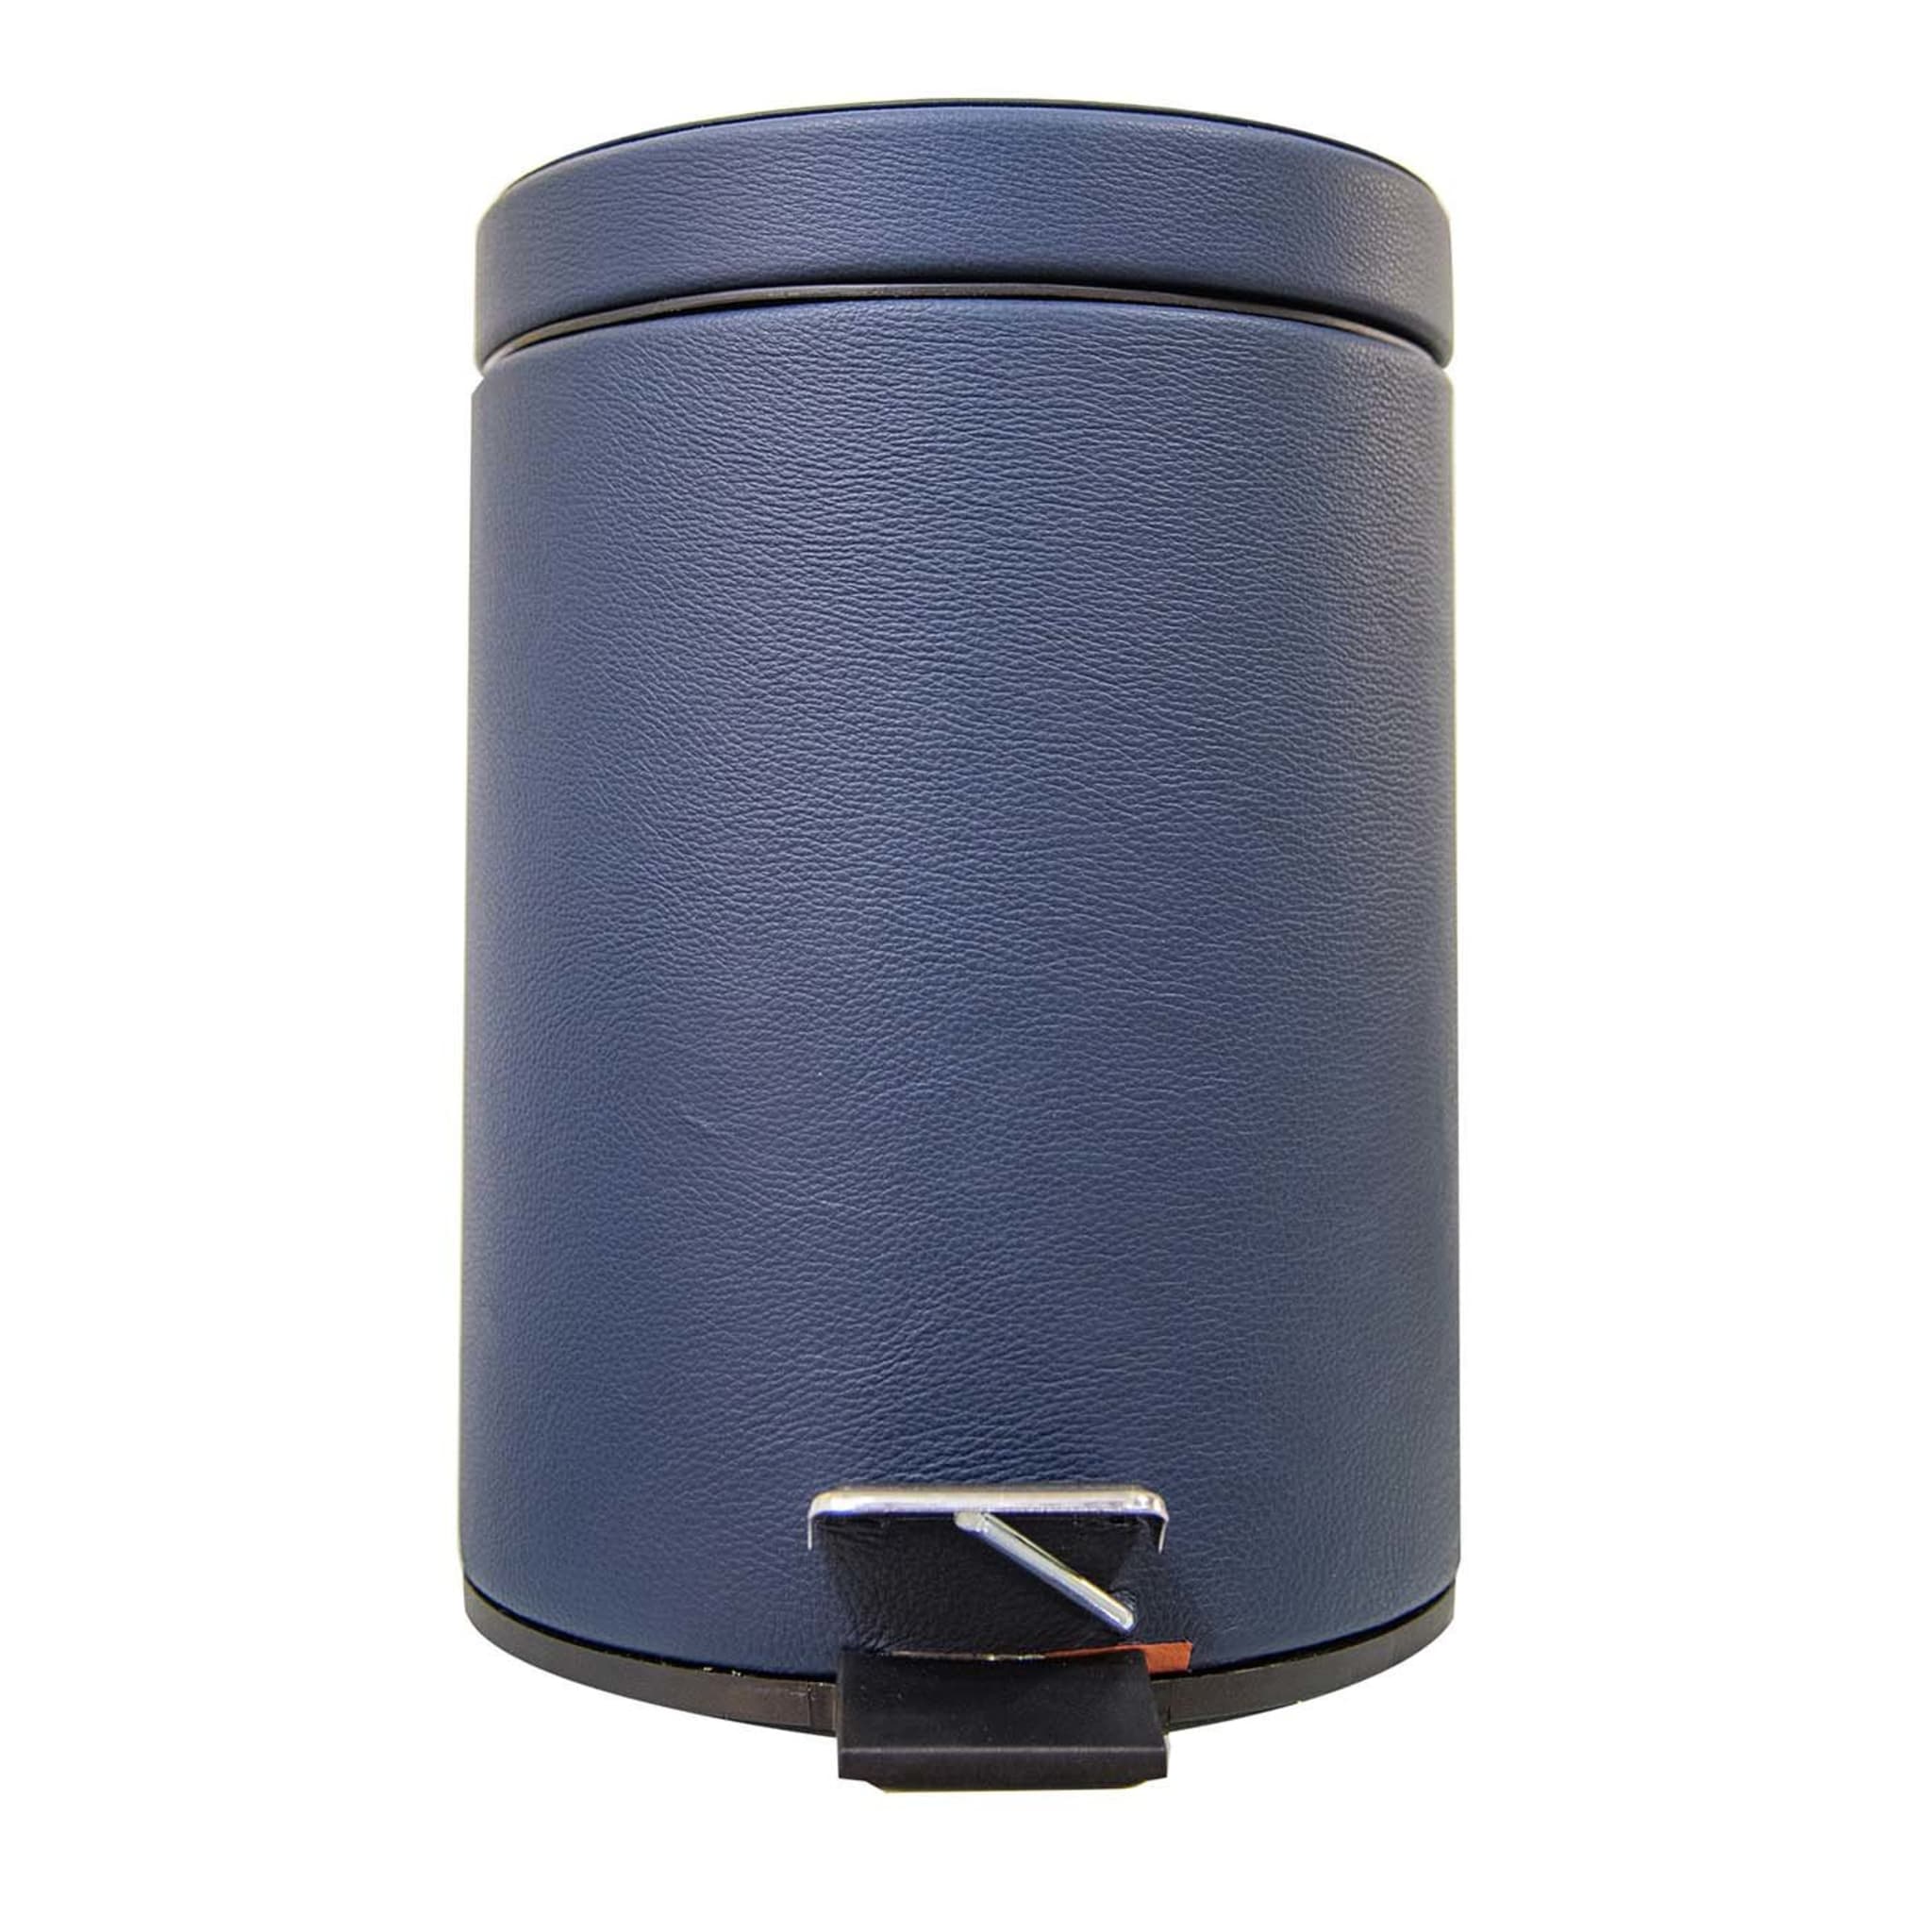 Leather Bin with Lid in Blue - Main view